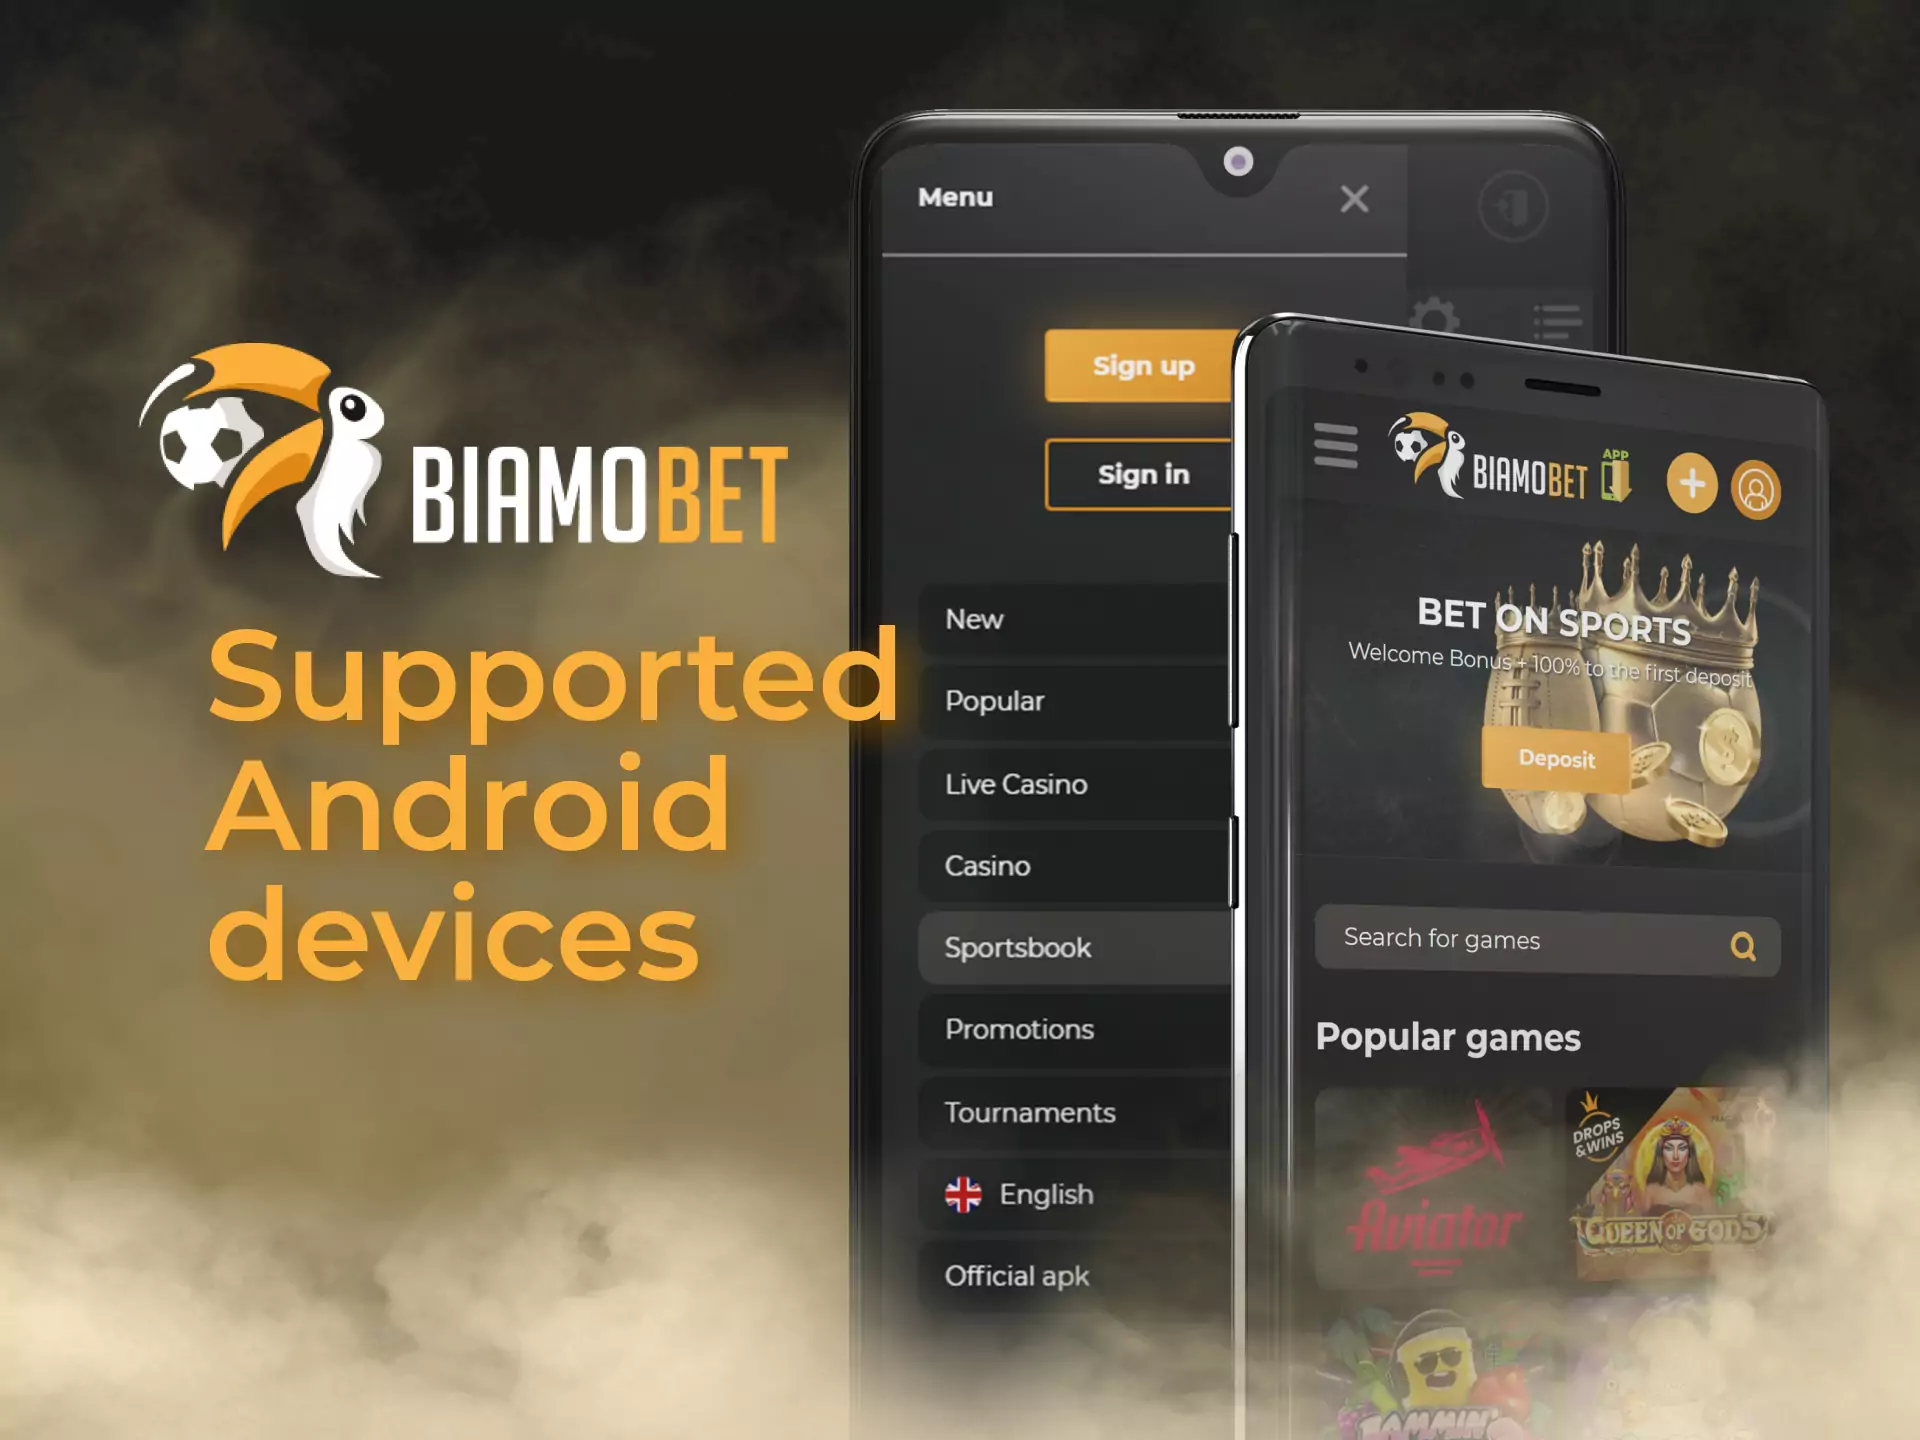 The Biamobet app works with no issues on any Android device.